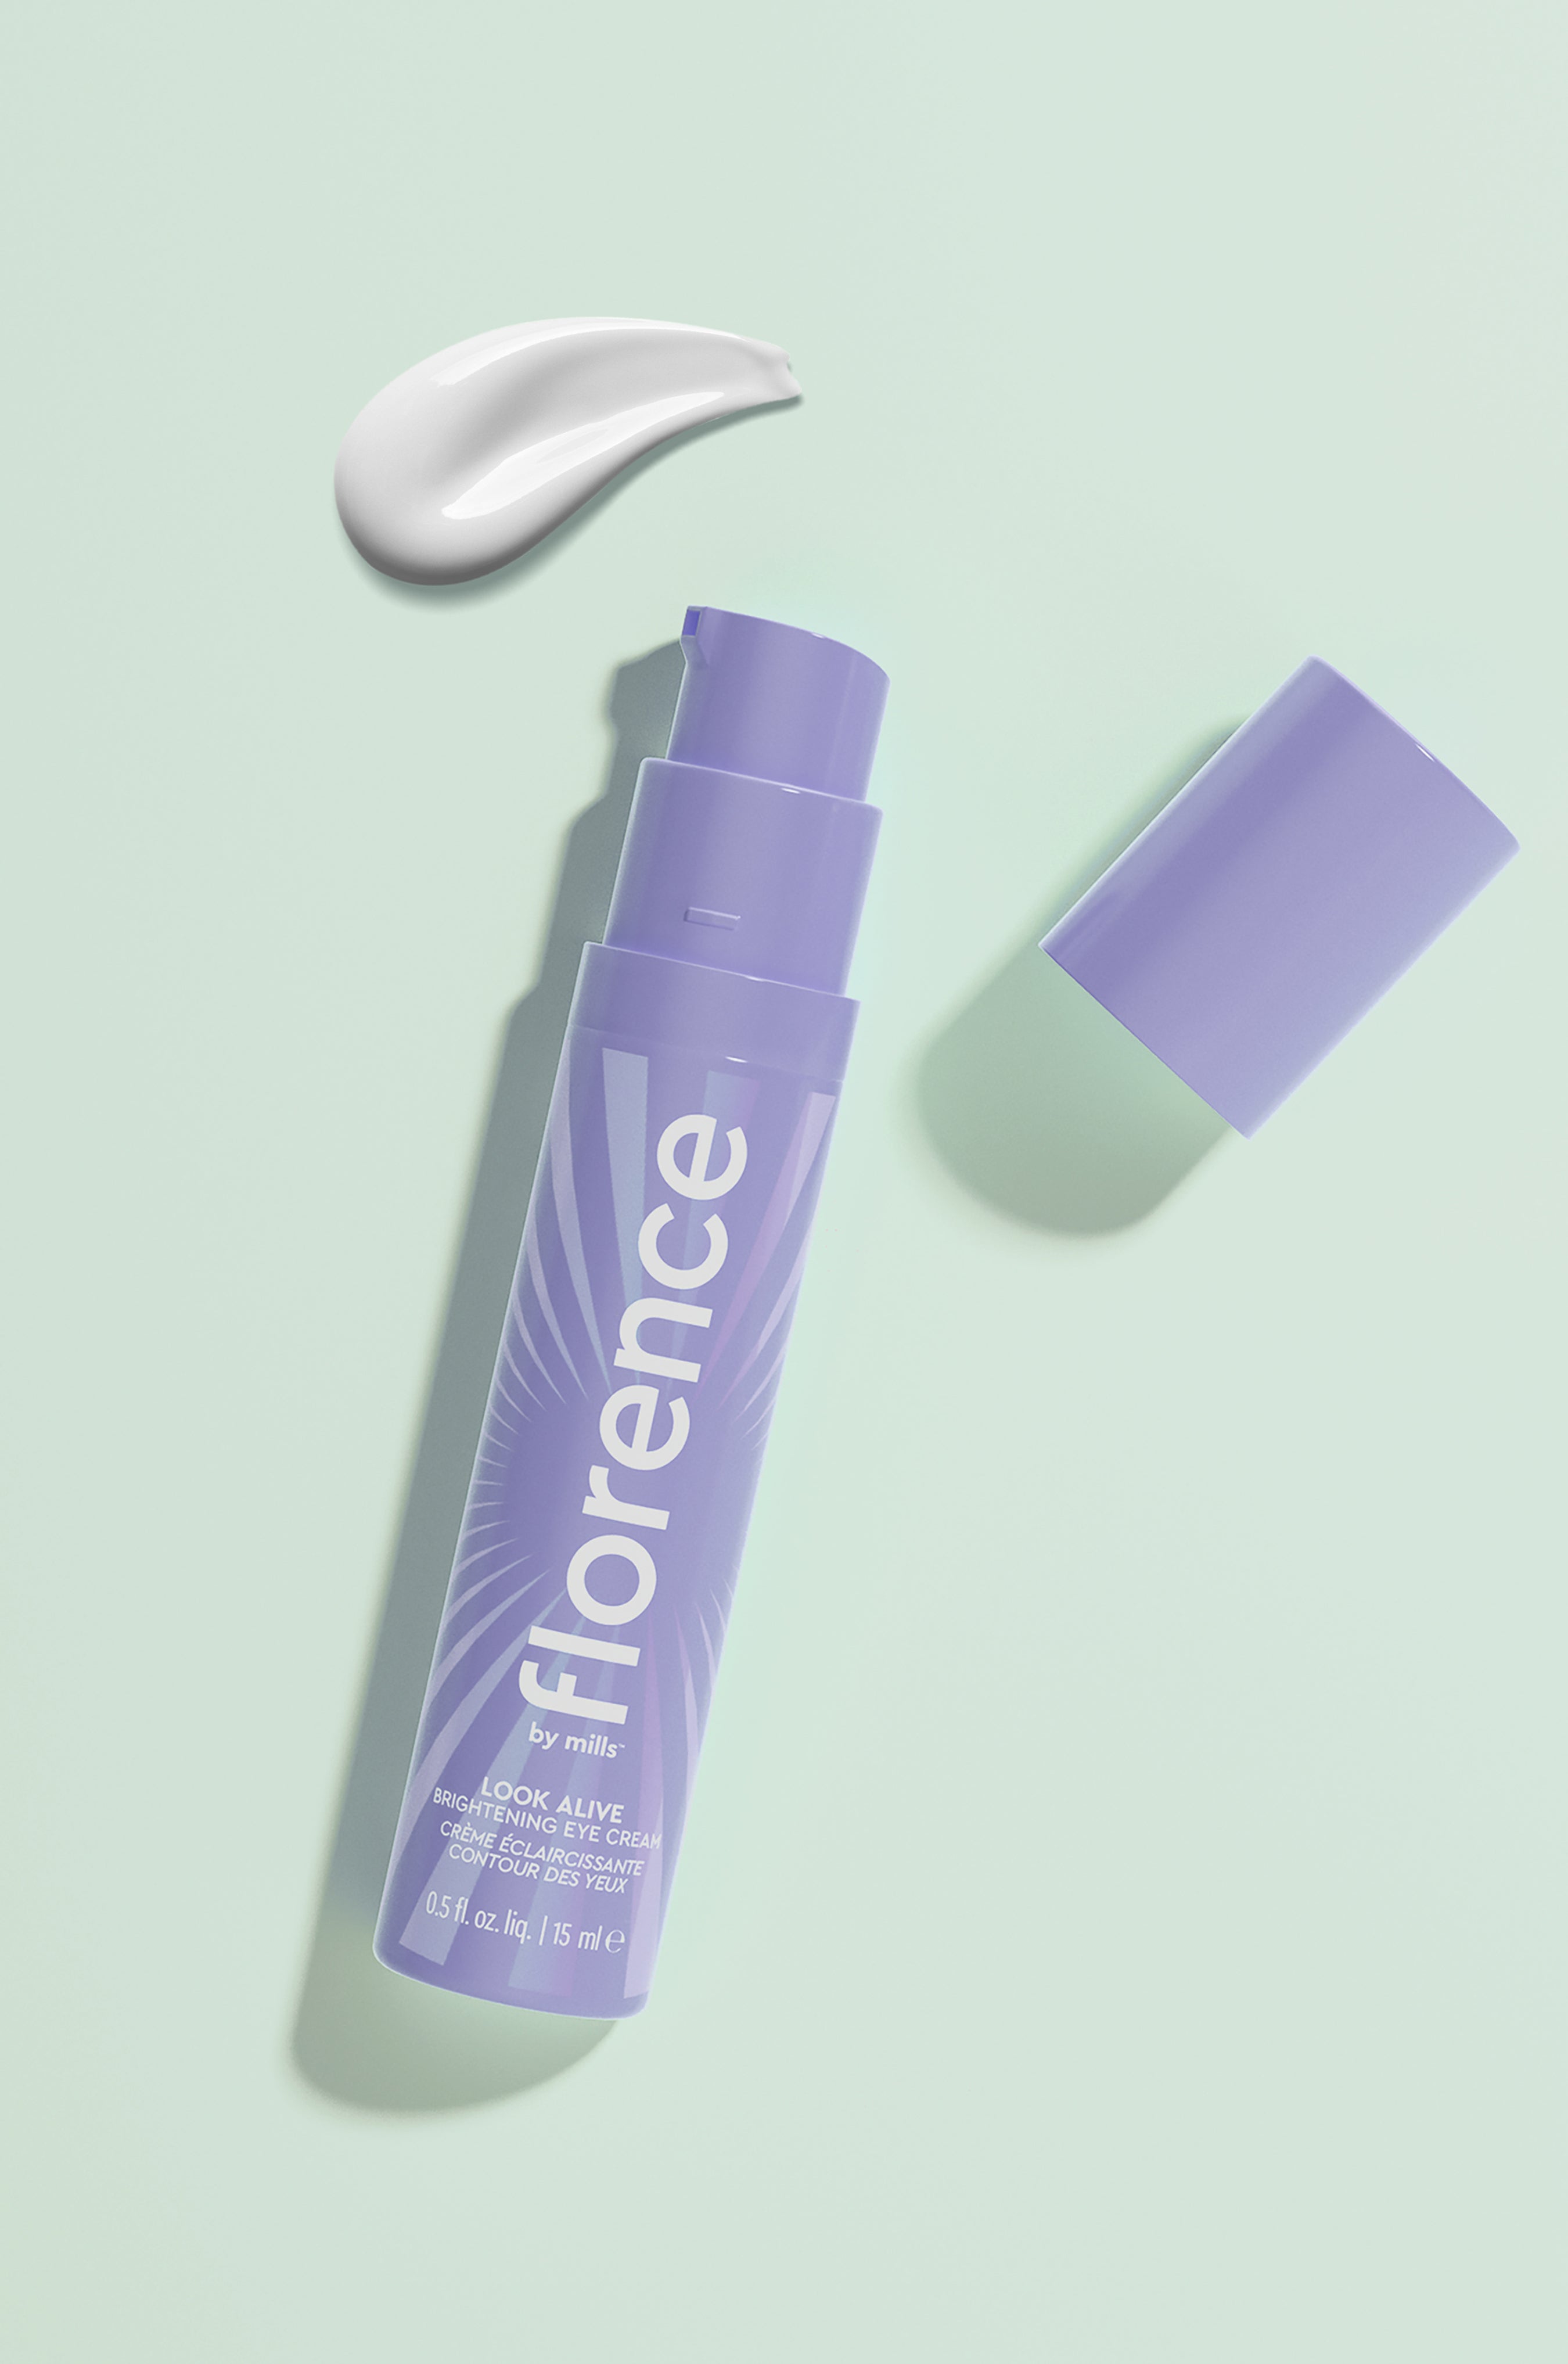 Say bye bye to puffy under eyes thanks to the @florence by mills Float